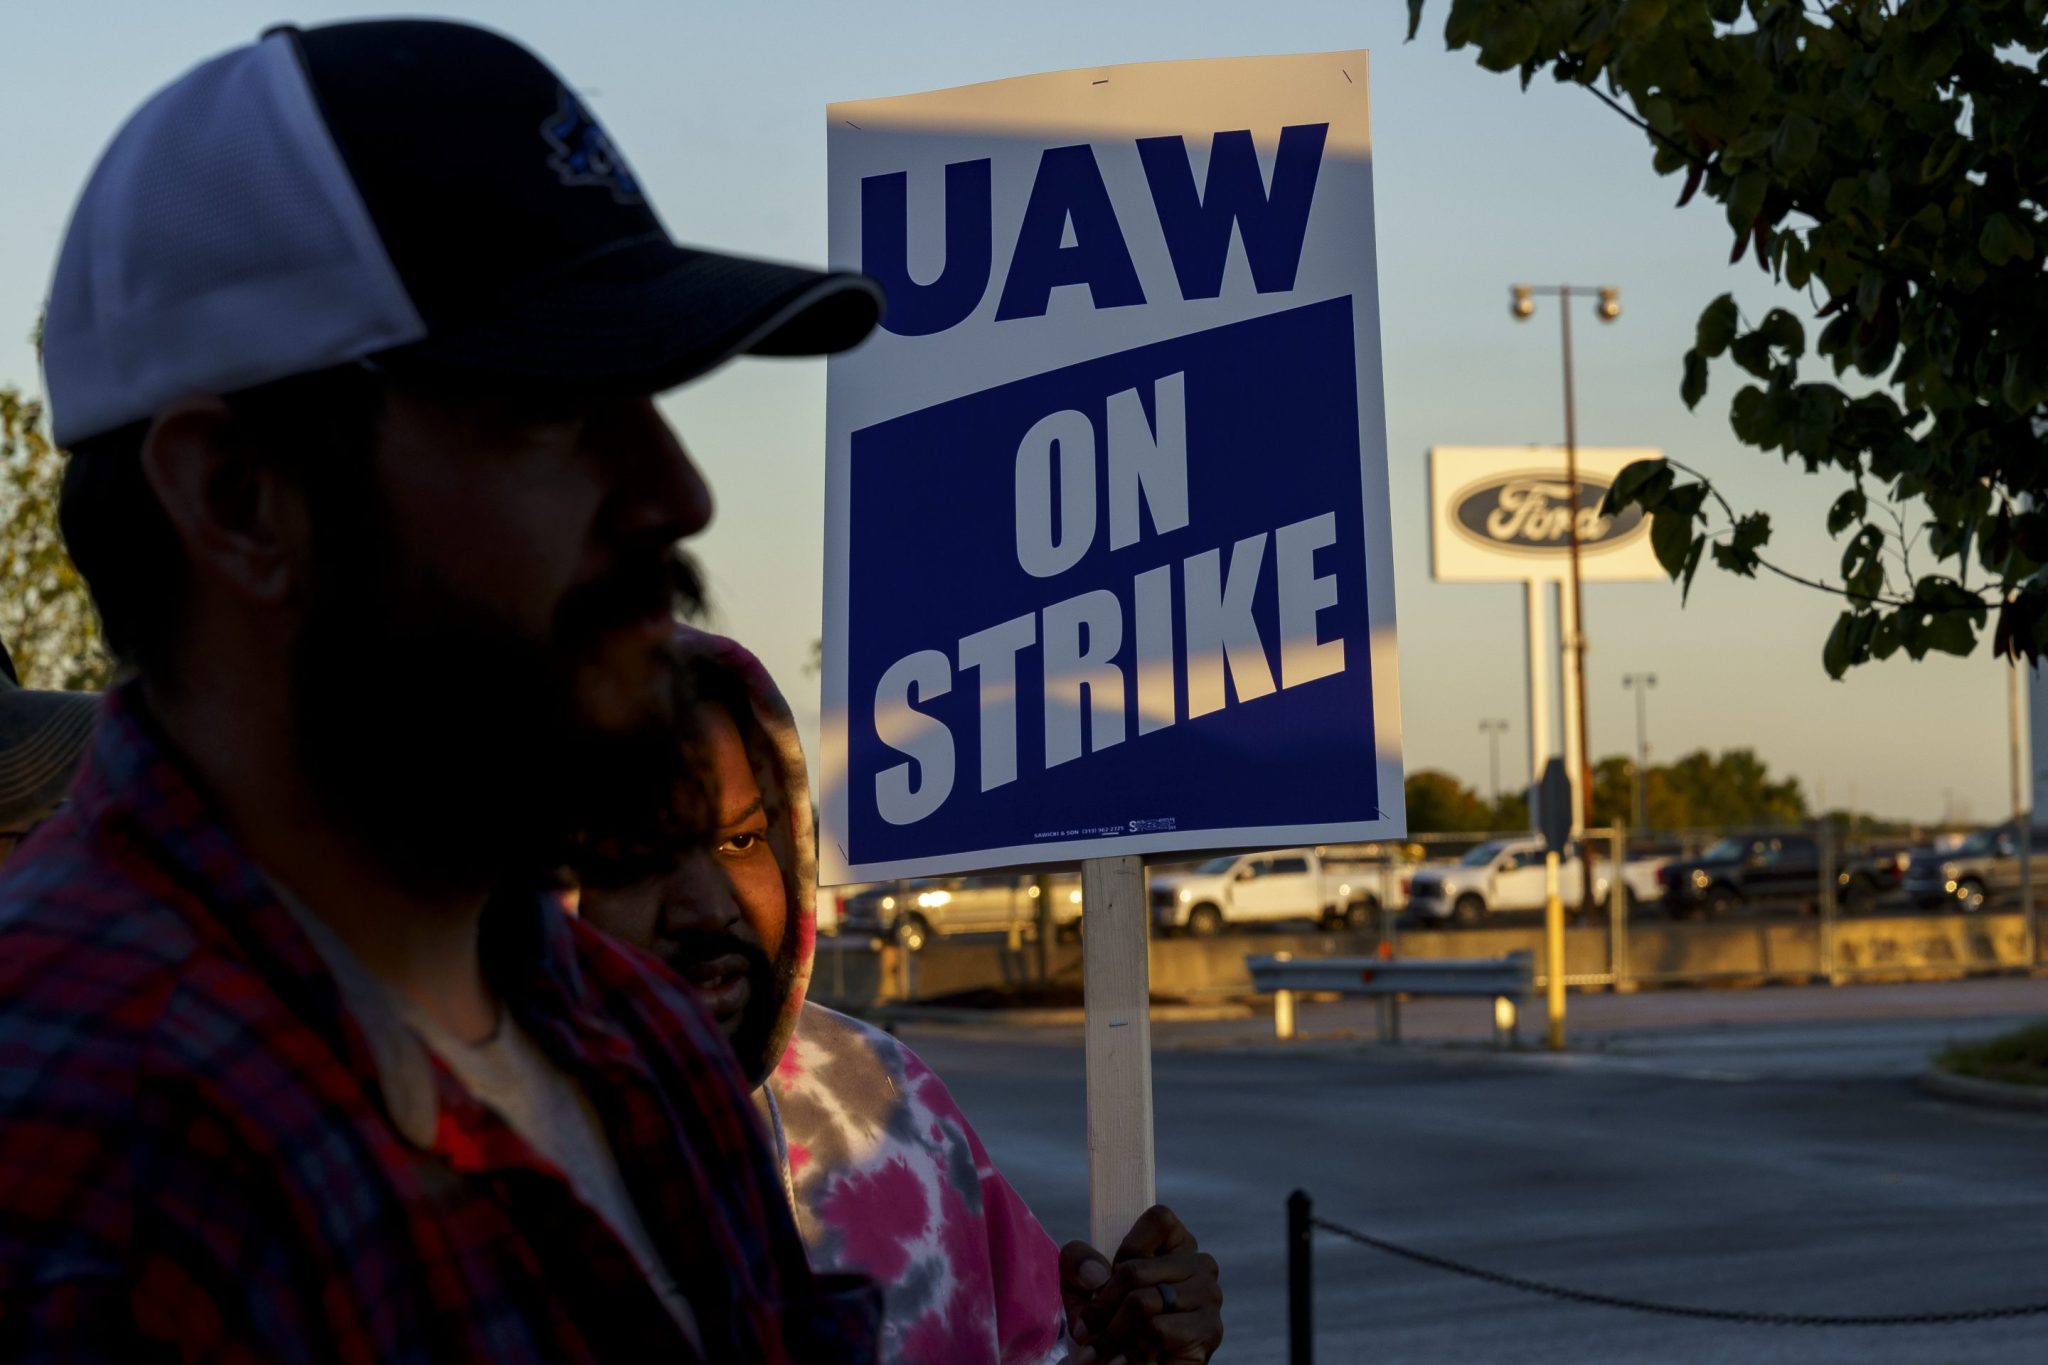 Ford reaches a tentative deal with striking autoworkers, marking a huge breakthrough in a work stoppage that’s cost the industry billions